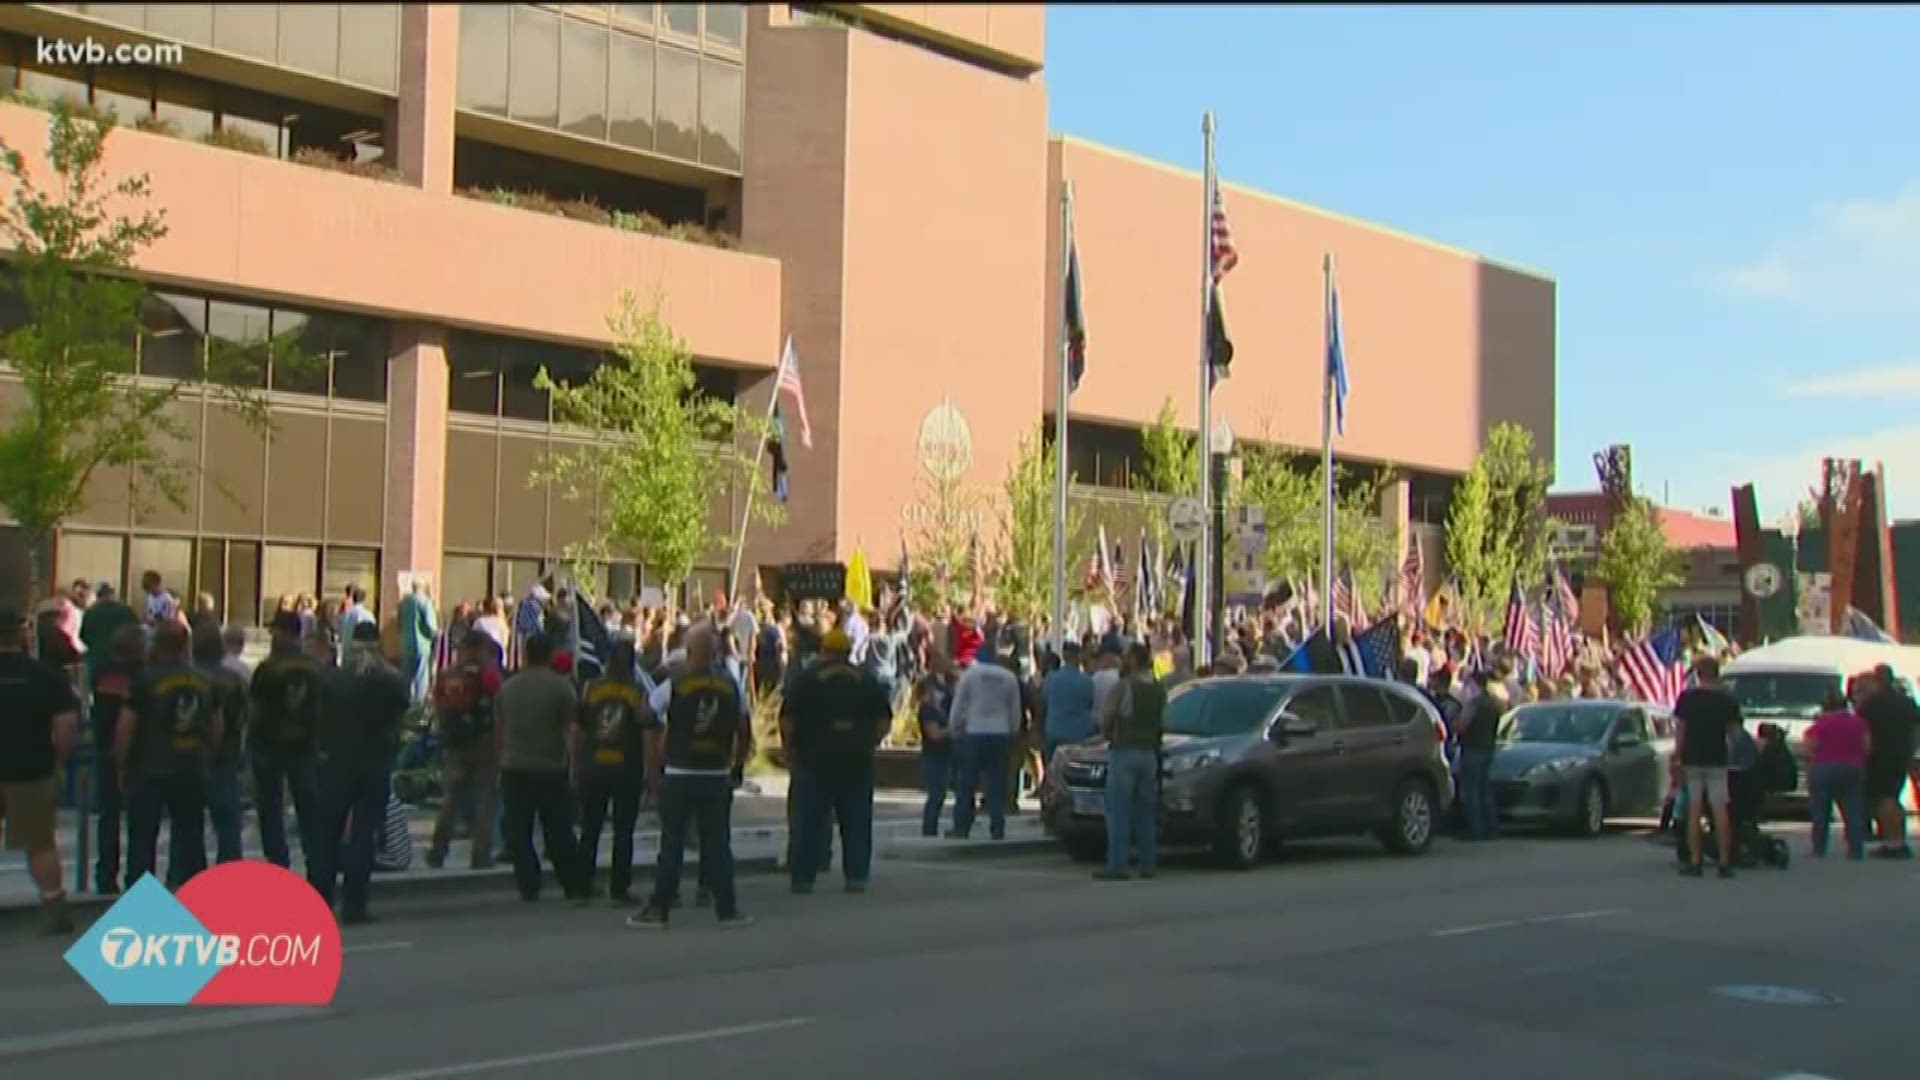 Rallies are planned in downtown Boise on Tuesday evening, but who is going to show up is the big question.